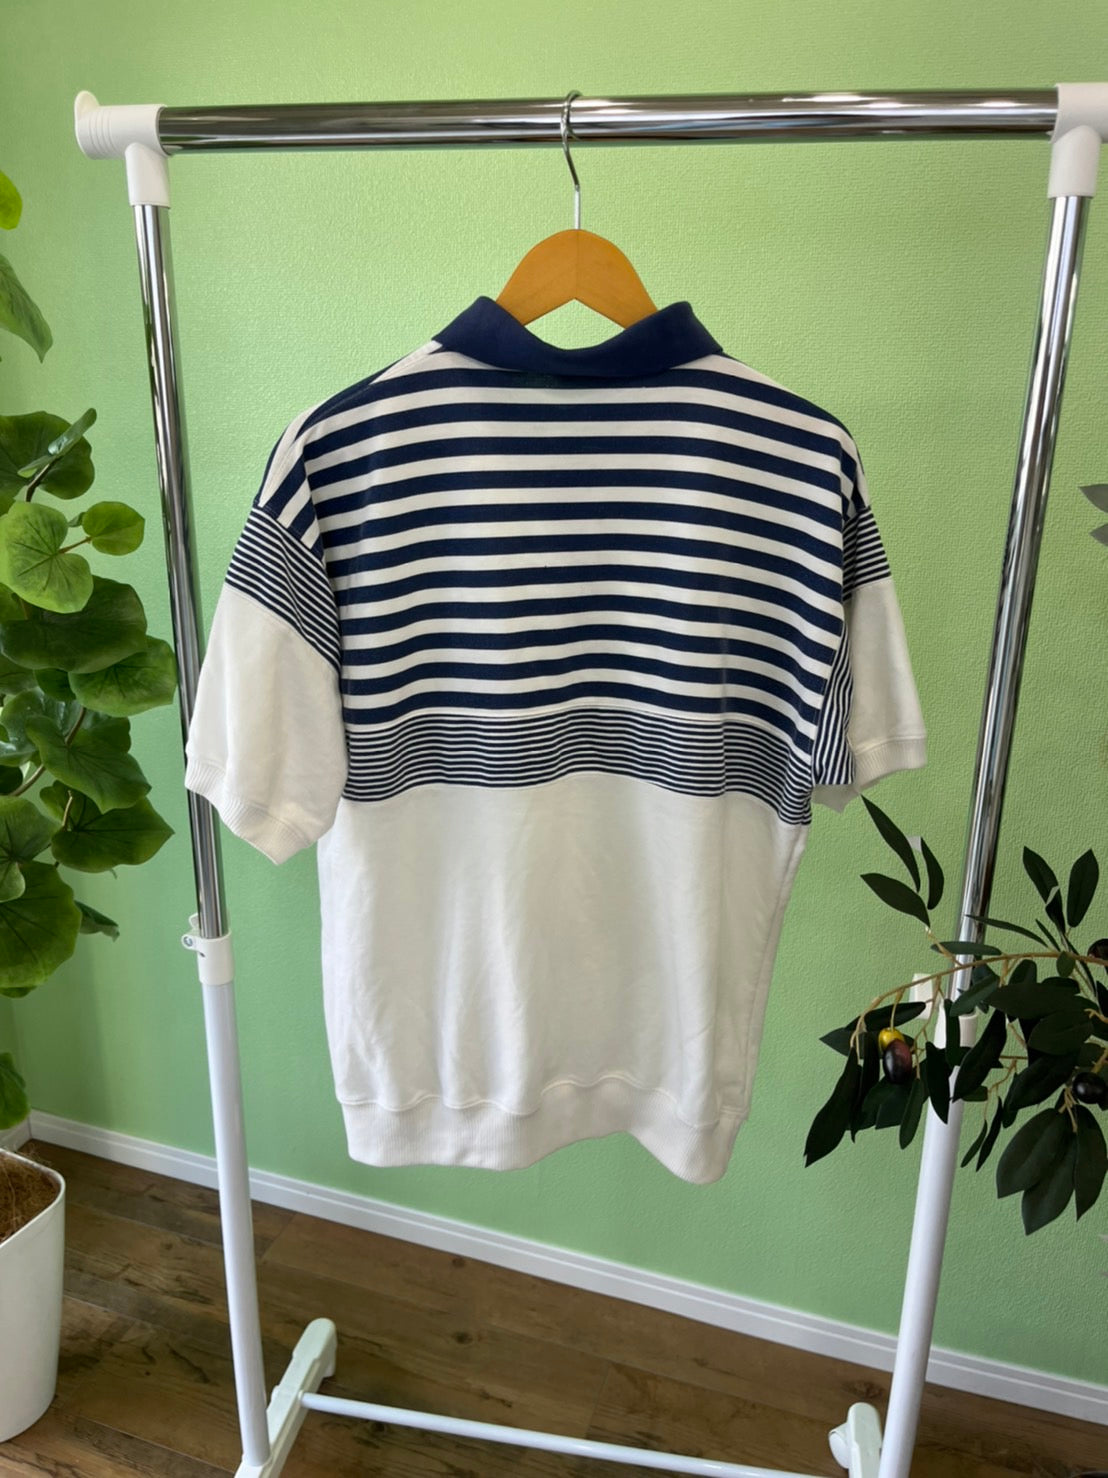 【USED】90's Idle time vintage  striped polo shirt T-shirt (men's L)